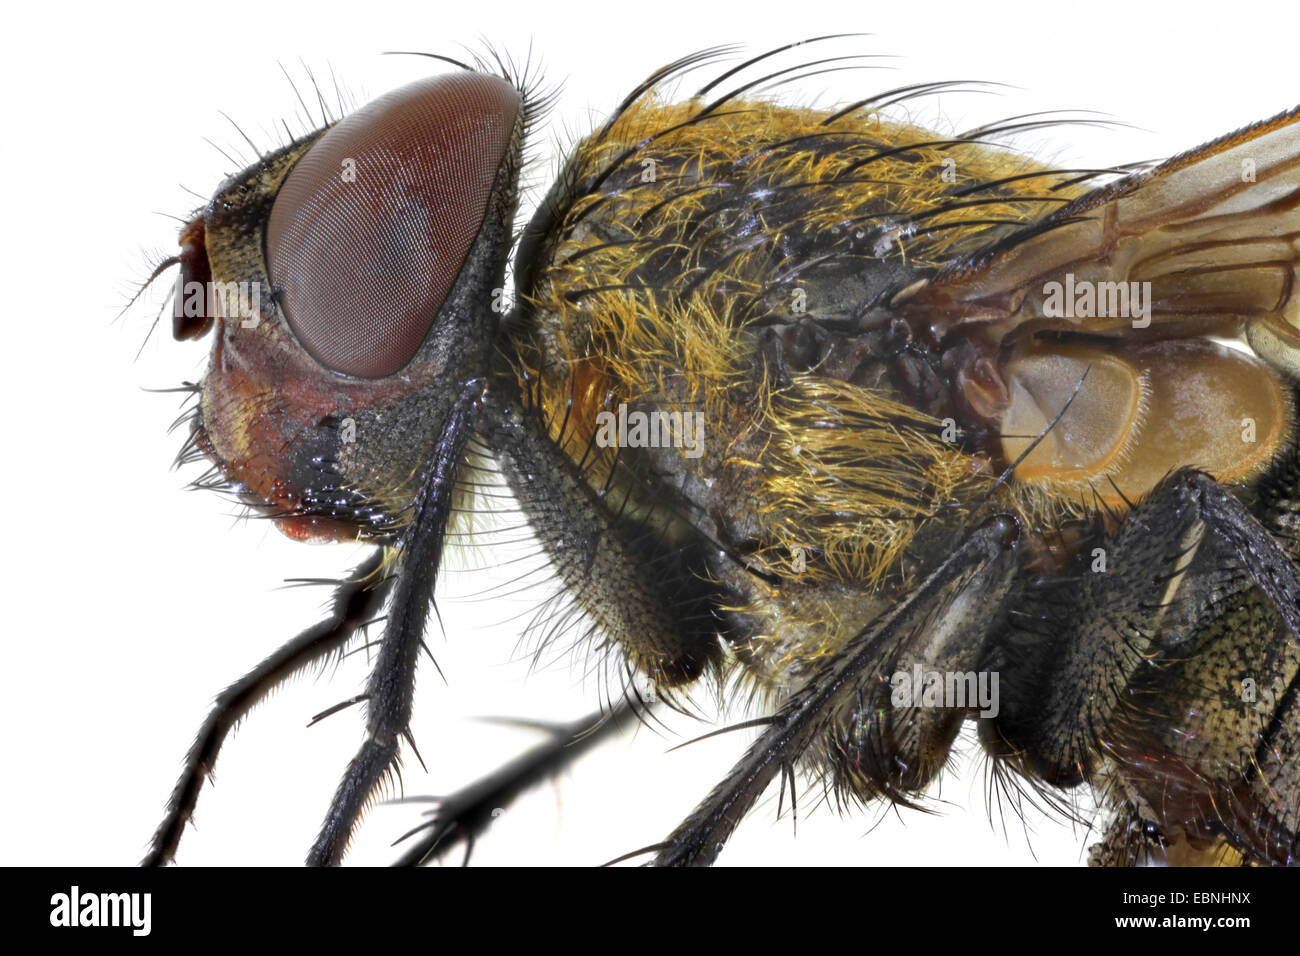 true flies (Brachycera, Diptera), head and thorax of a fly, lateral view Stock Photo